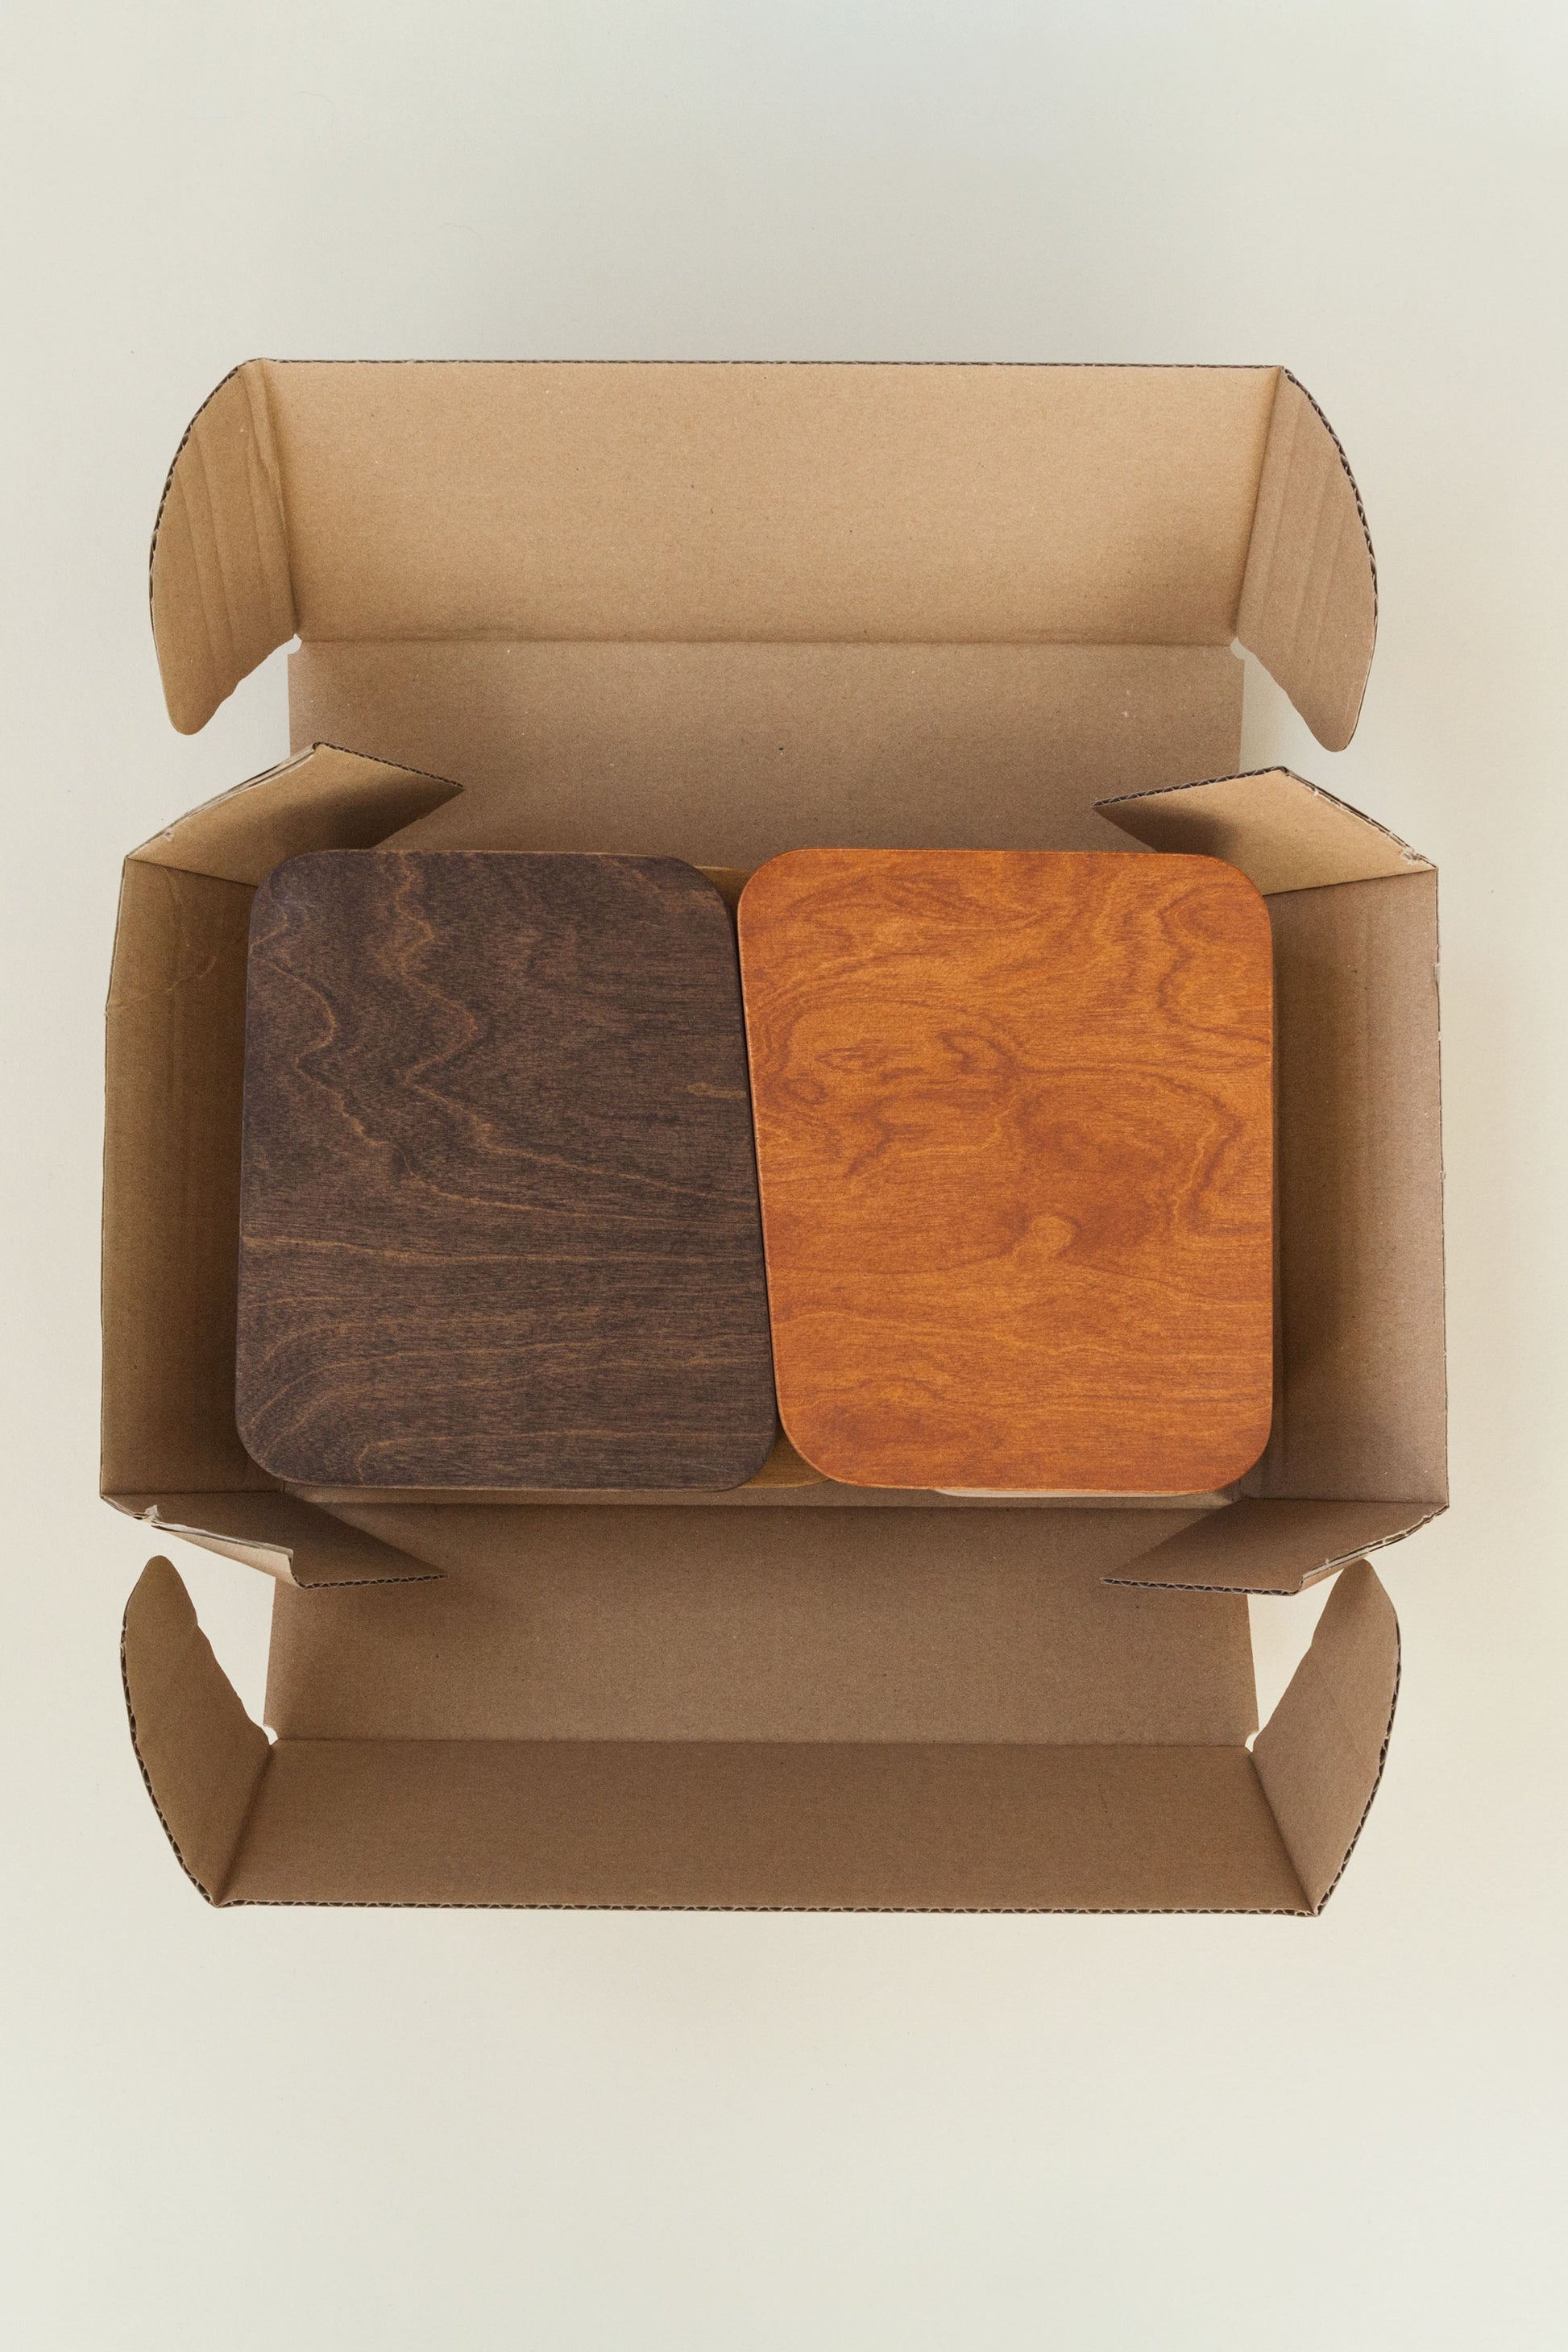 wood-color-samples-in-the-box